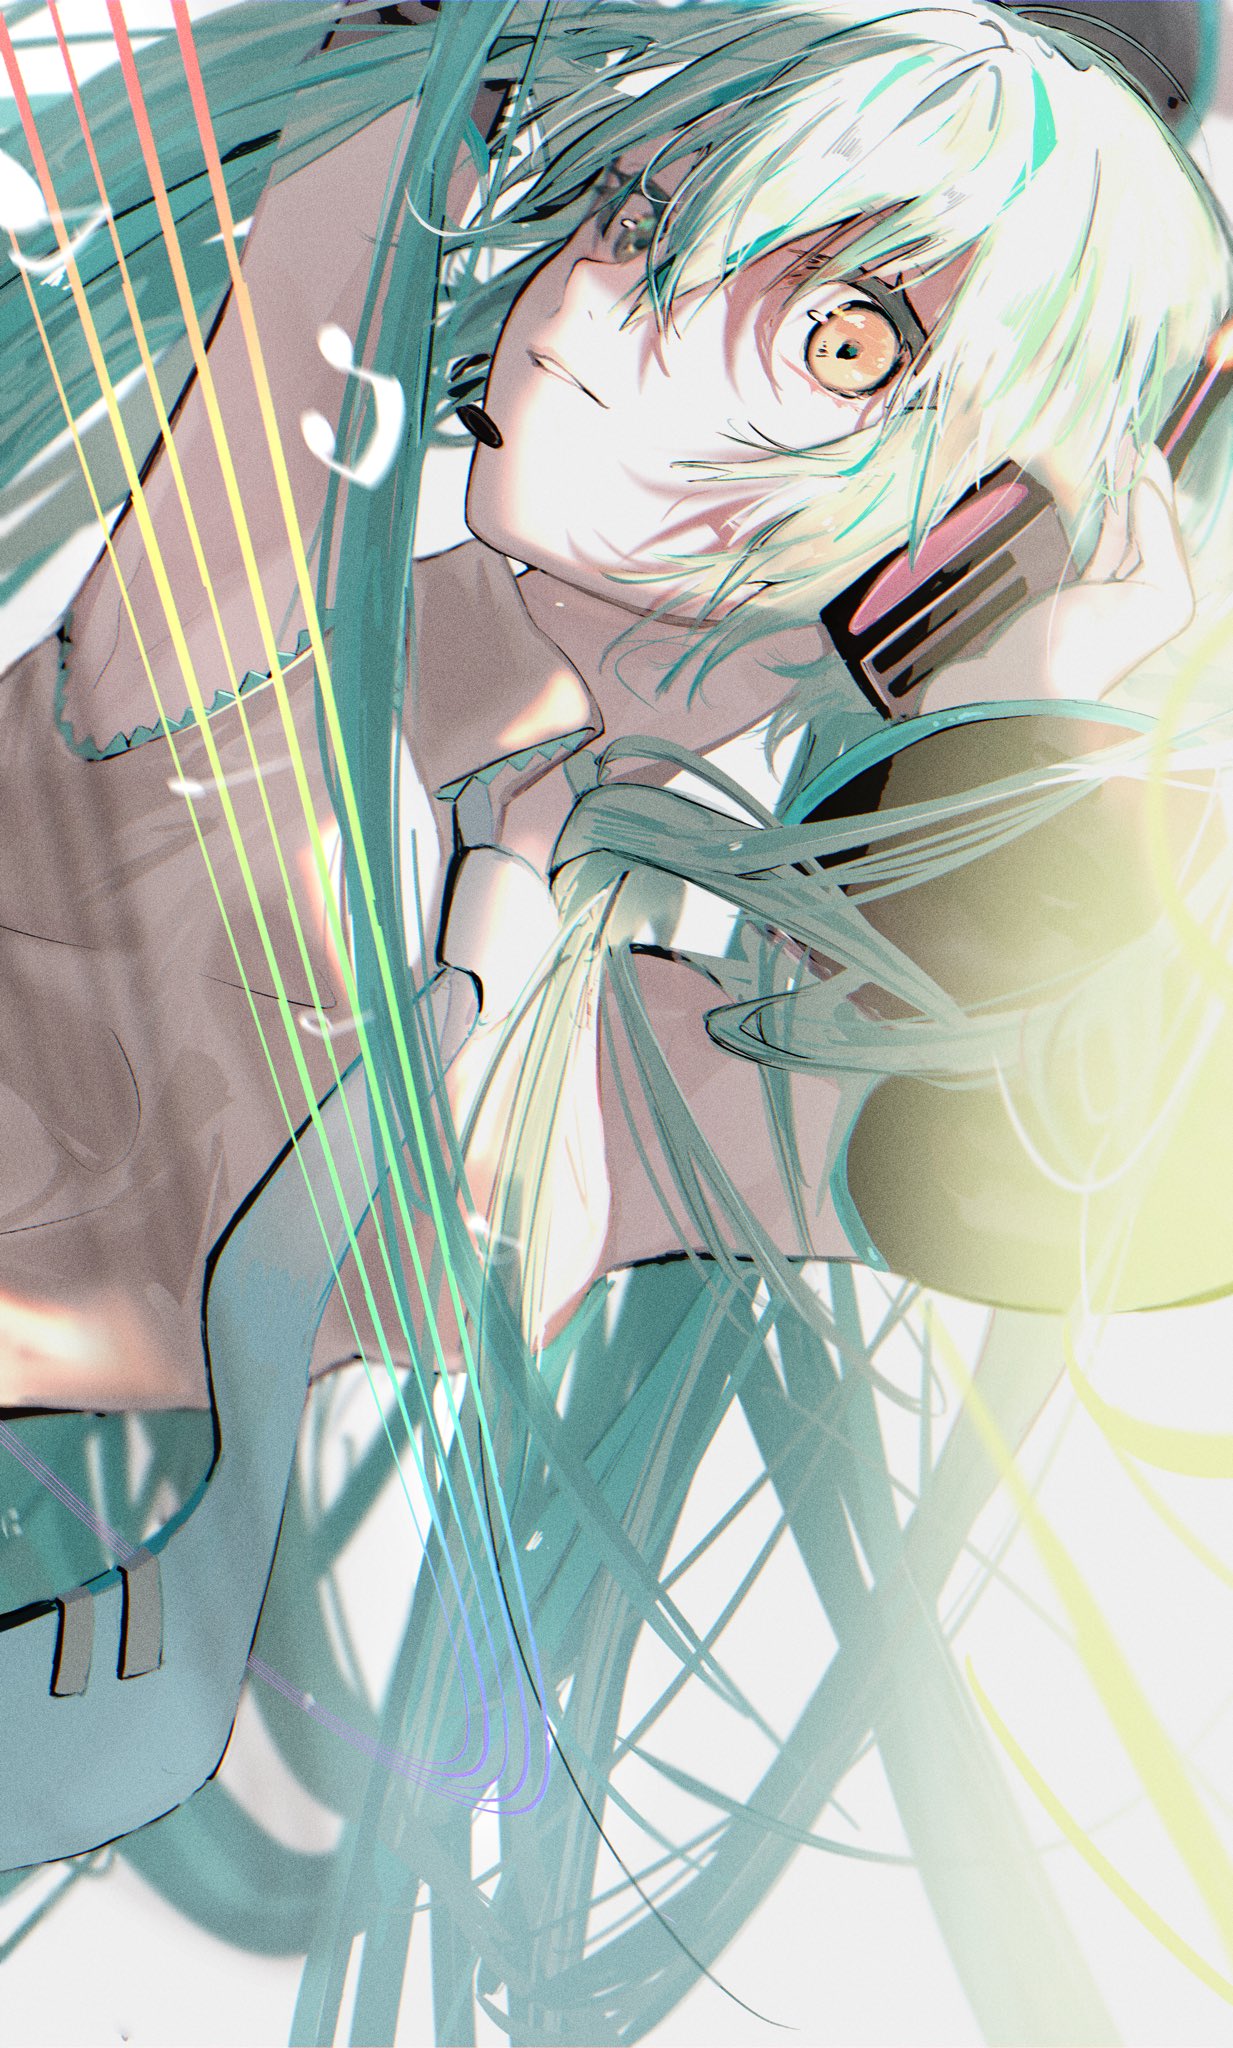 aqua_eyes aqua_hair aqua_neckwear arm_up bangs detached_sleeves eyebrows_visible_through_hair hand_on_headset hatsune_miku headset highres light long_hair looking_at_viewer music musical_note necktie open_mouth shirt simple_background smile solo standing sushineko8 twintails upper_body vocaloid white_background white_shirt